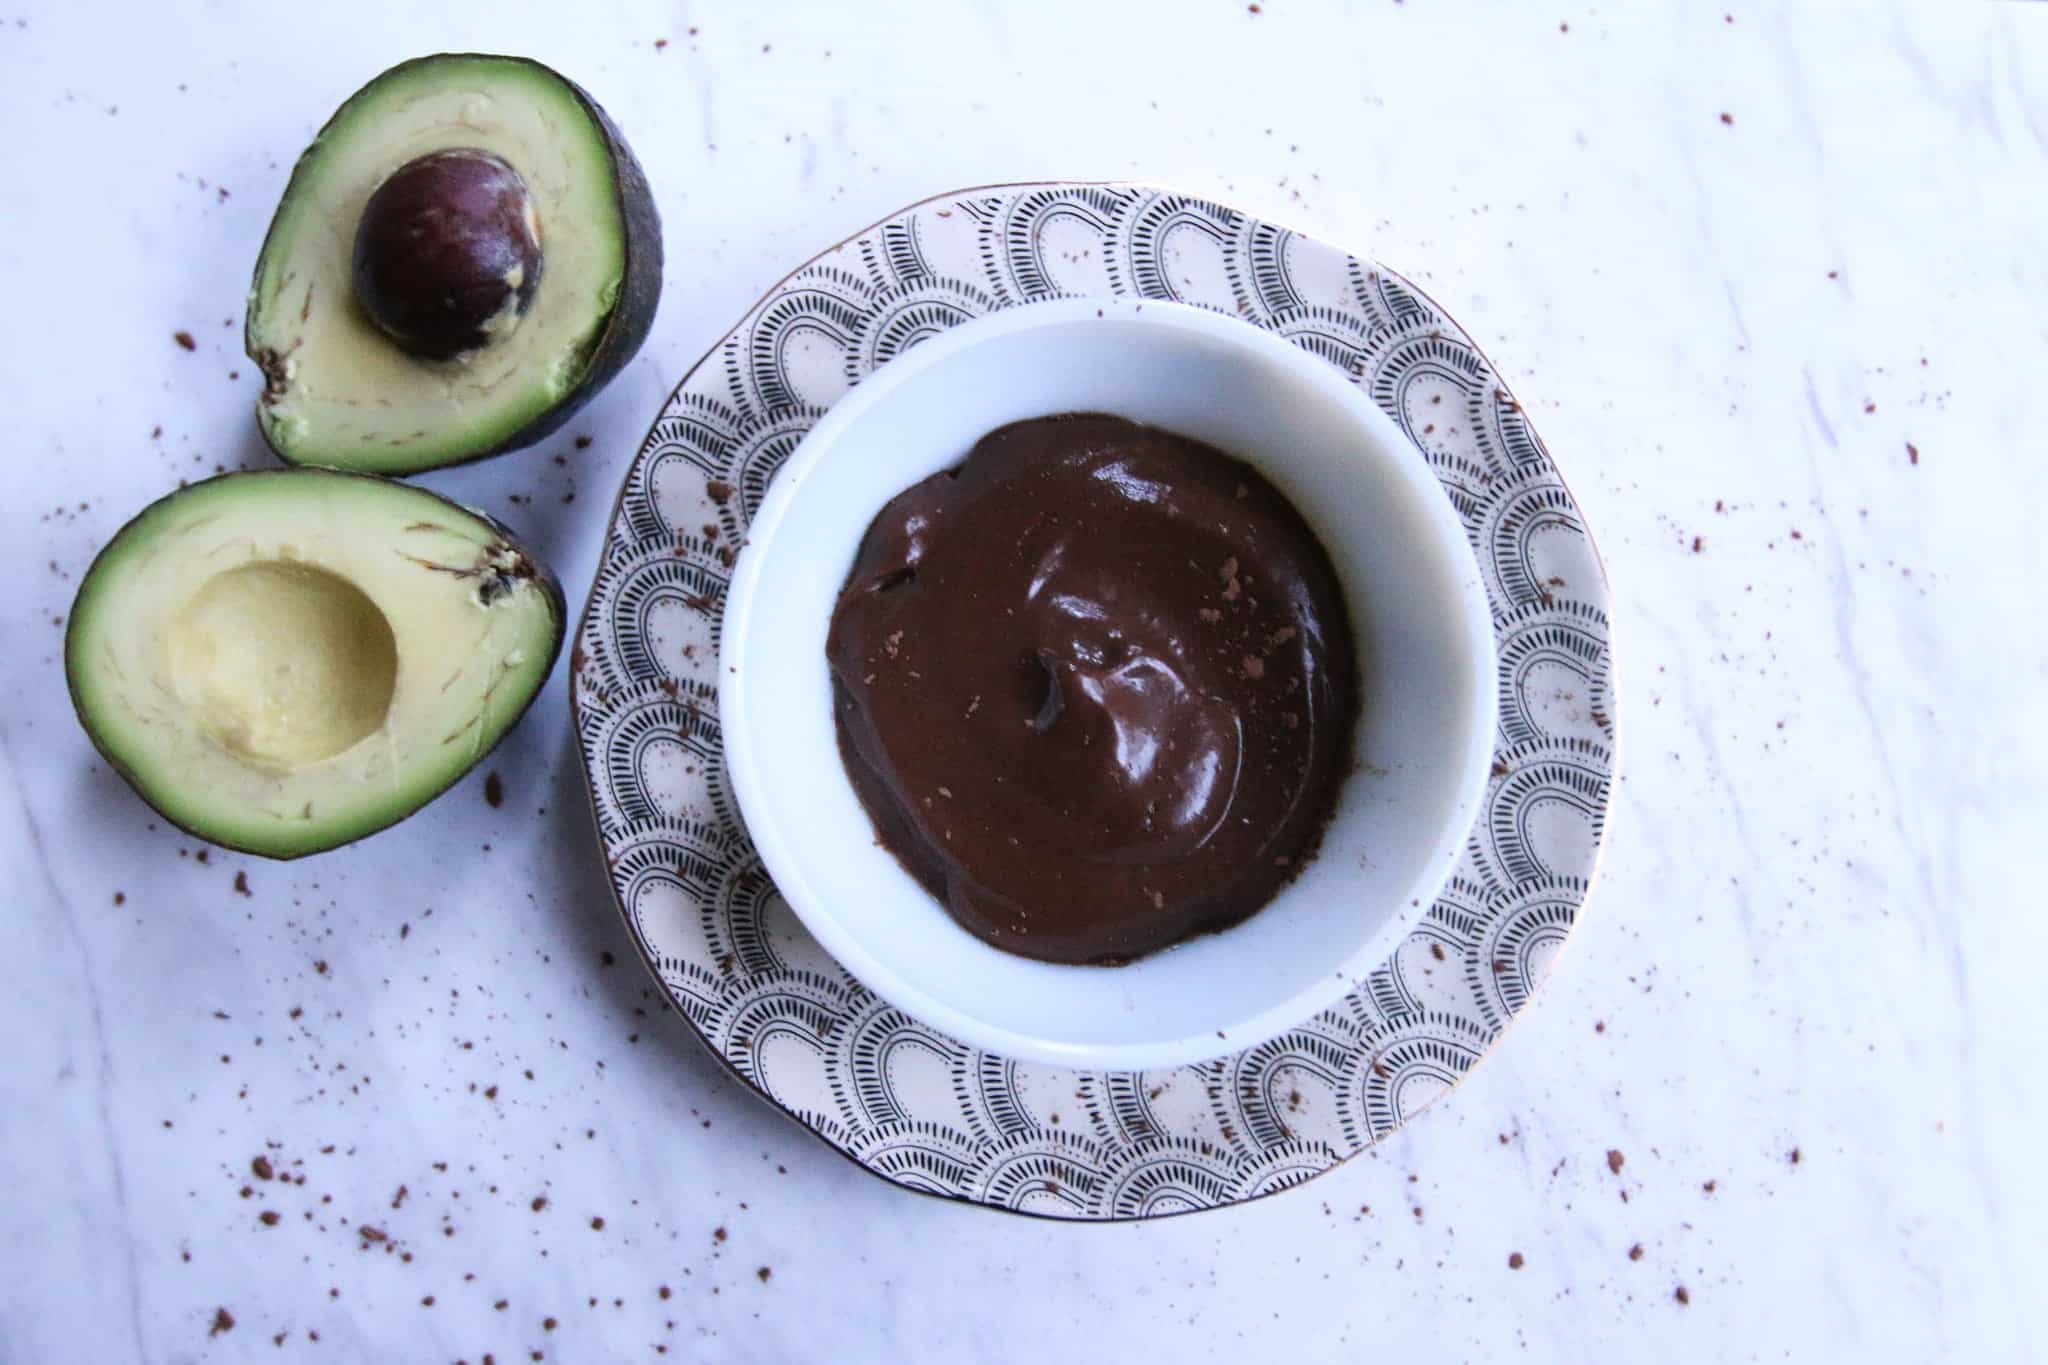 chocolate avocado mousse in decorative bowl